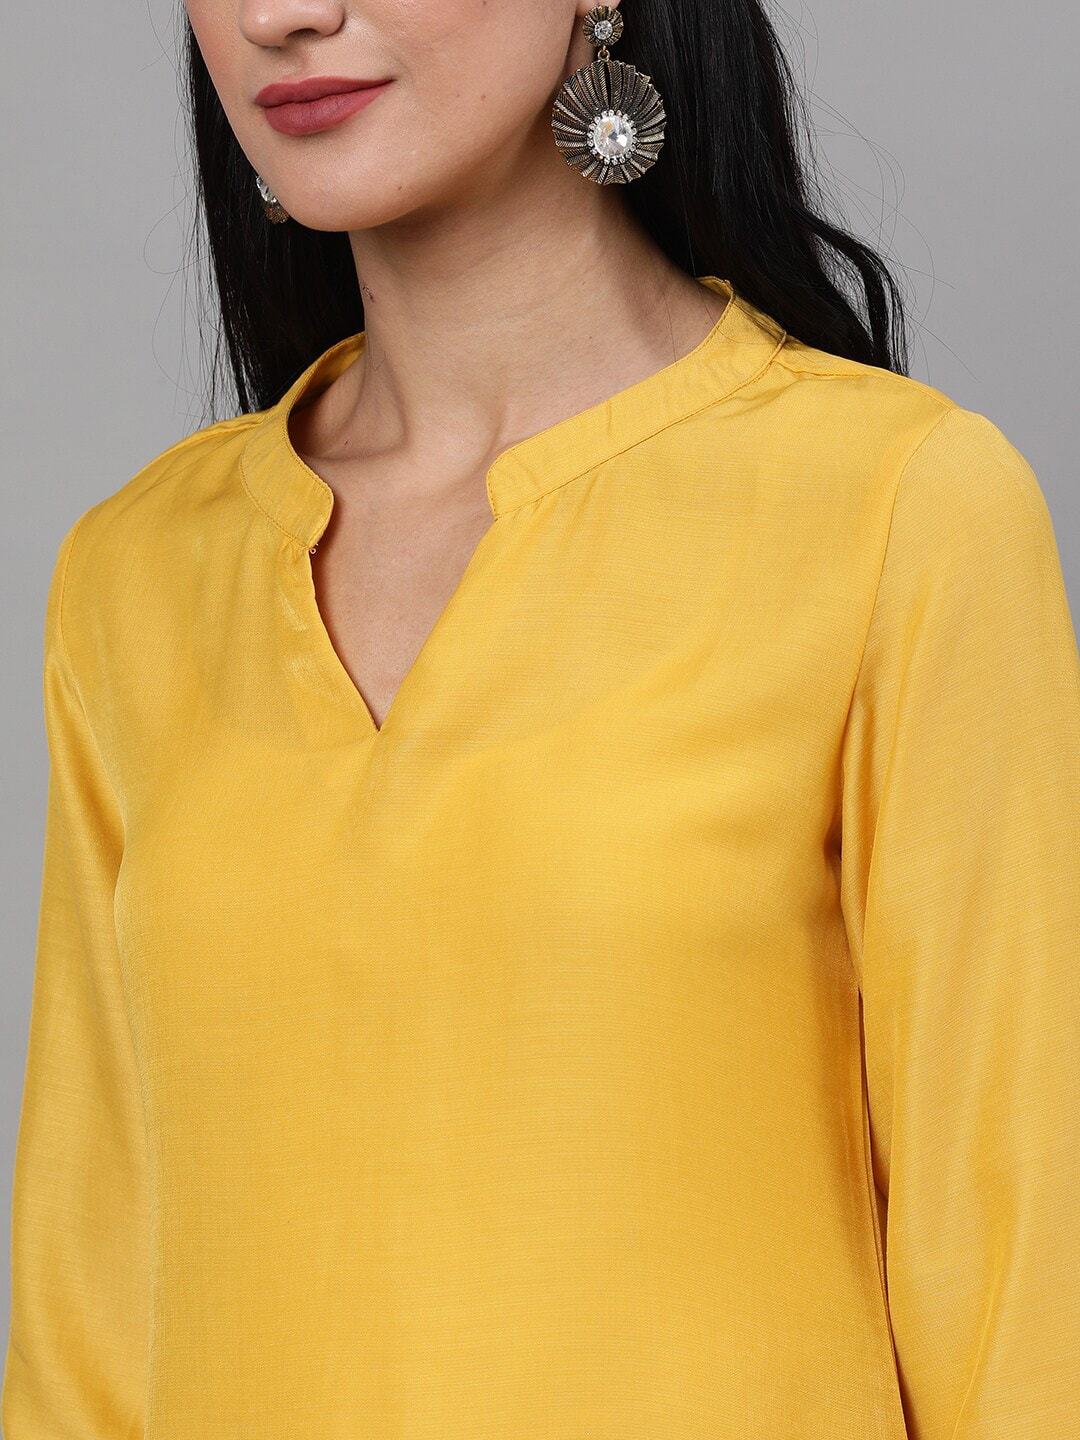 Women's  Yellow & Gold-Toned Embroidered Kurta with Trousers - AKS